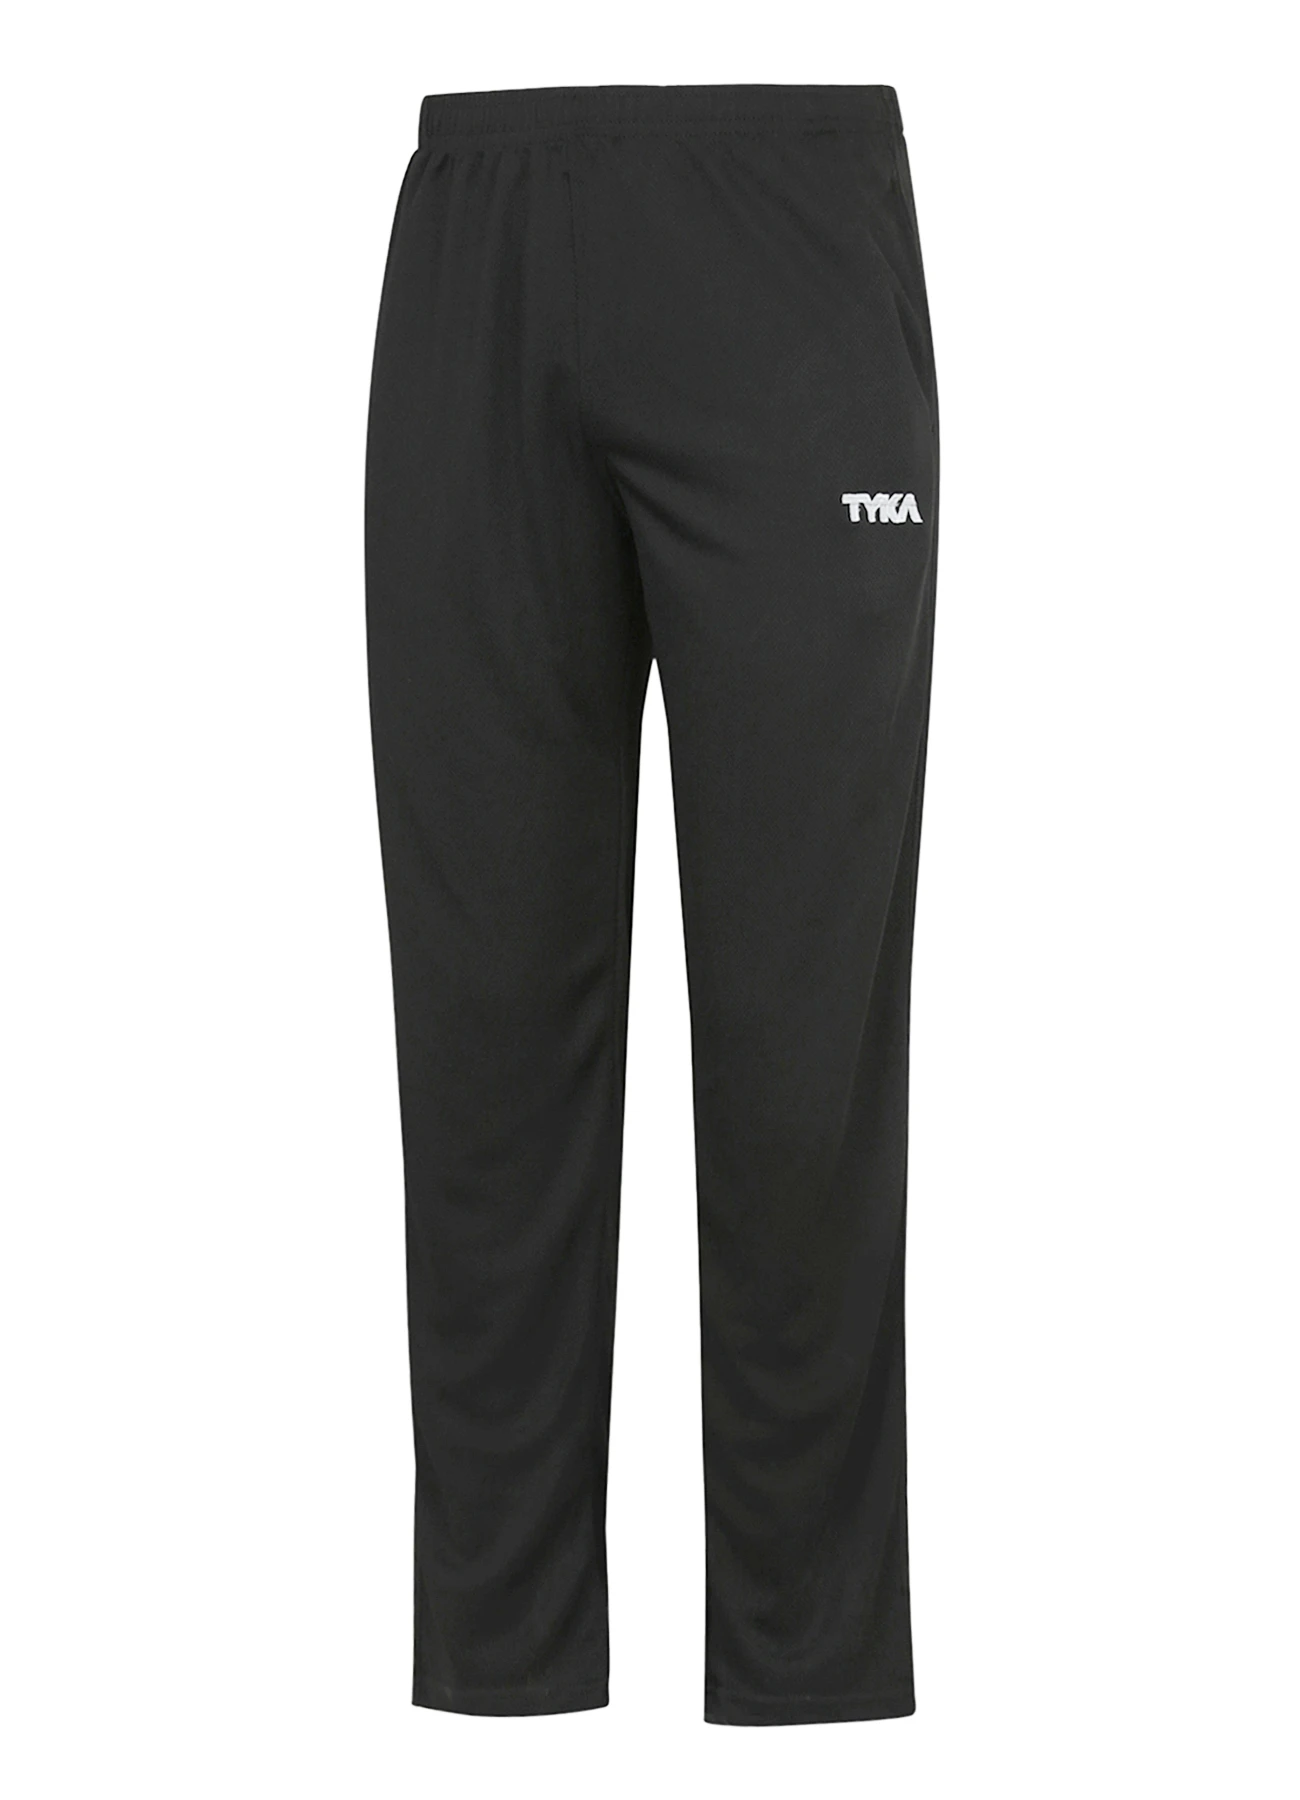 The SR Fitness NS Lycra Track Pants for Men | Best Workout Pants | Quick  Dry Sports Lower (M, Black) : Amazon.in: Clothing & Accessories